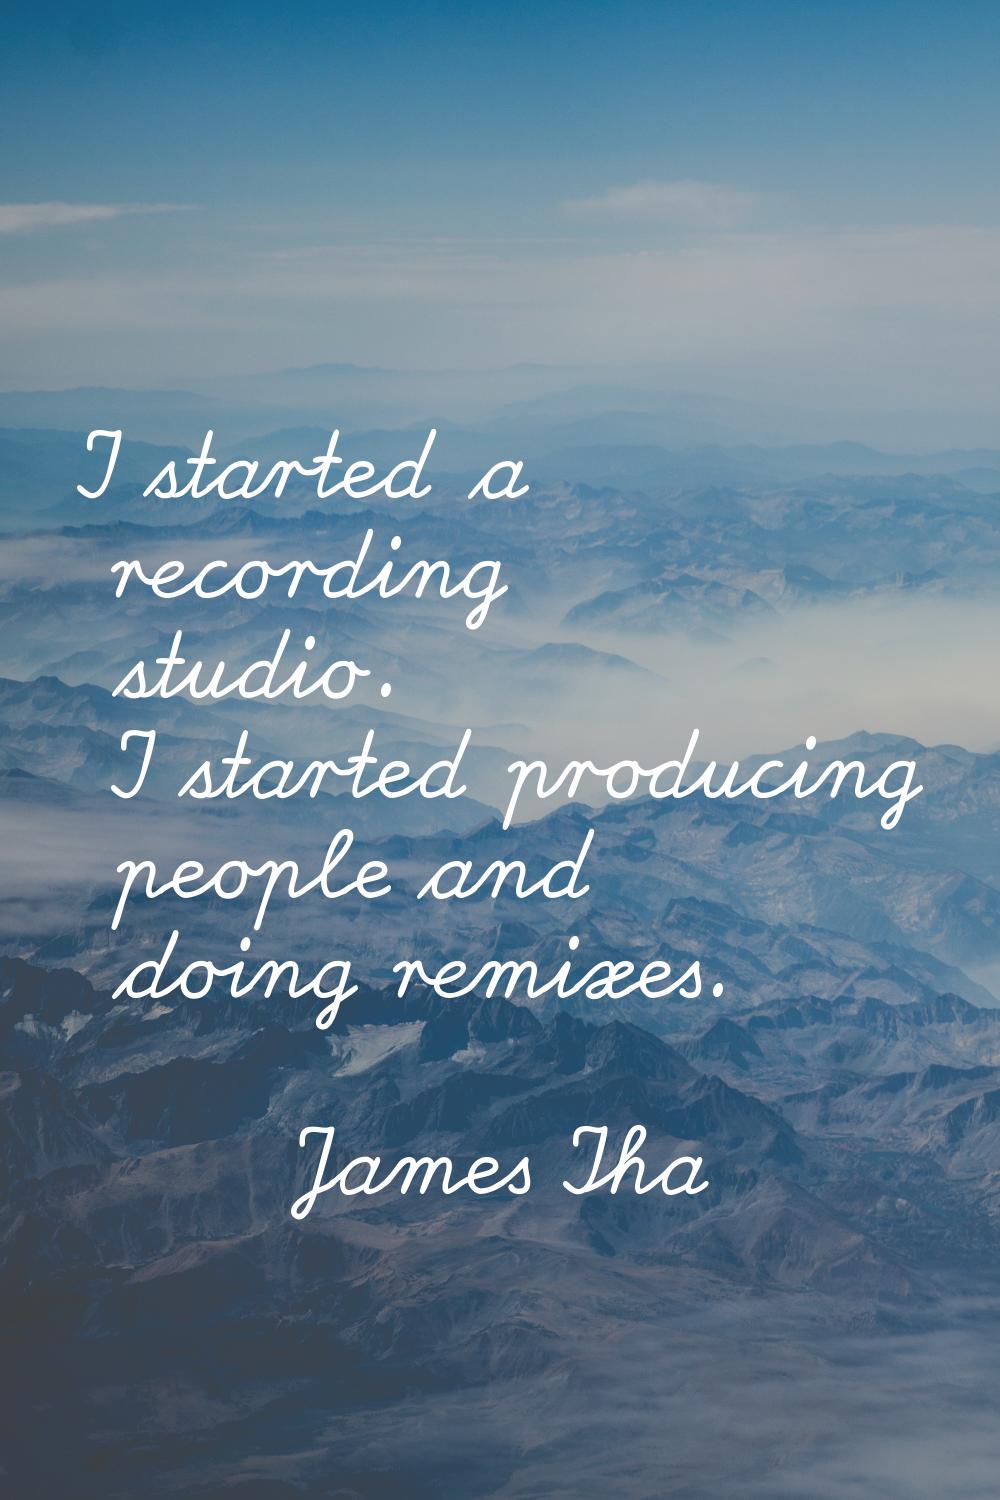 I started a recording studio. I started producing people and doing remixes.